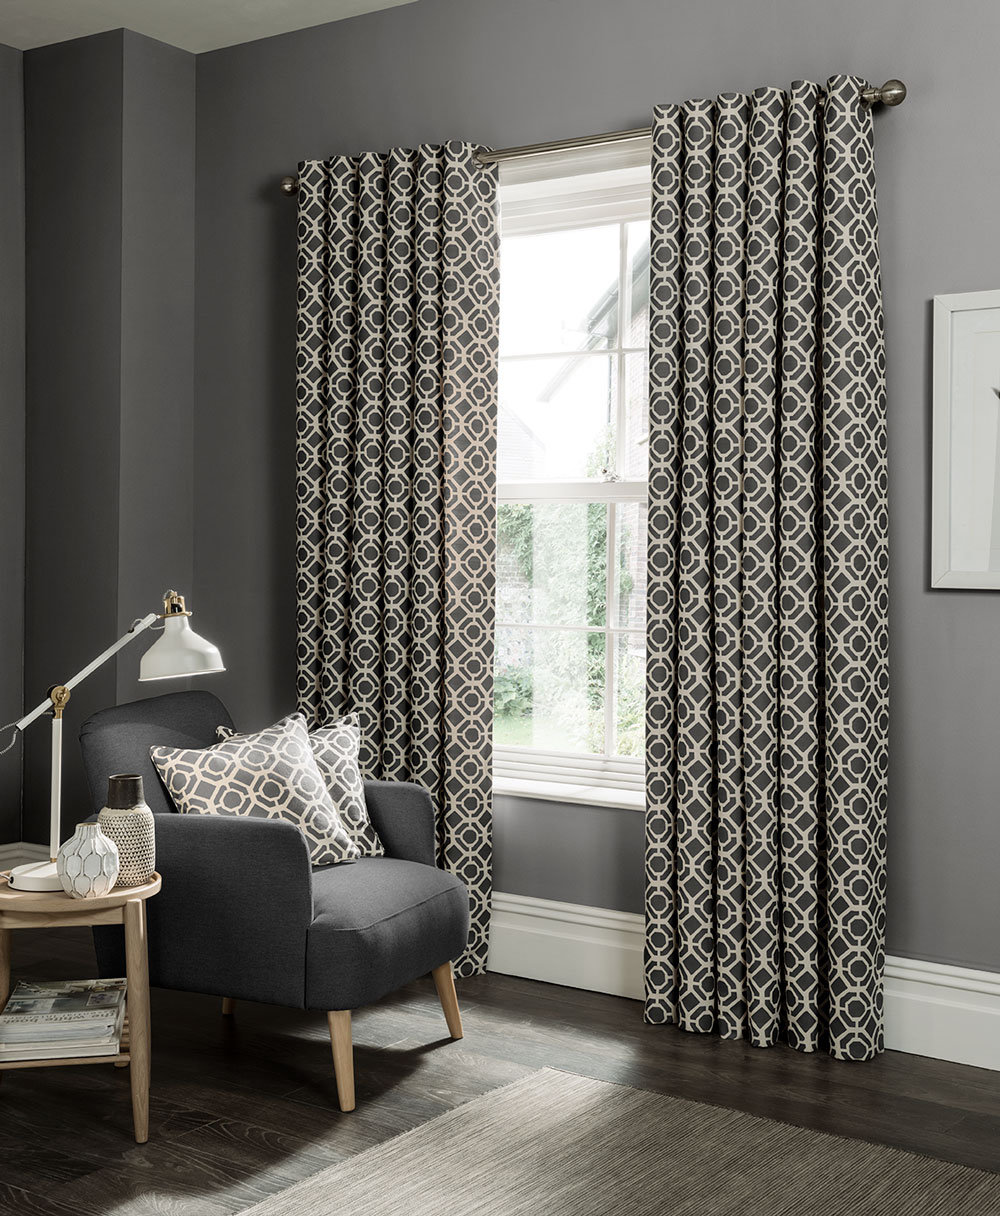 Castello eyelet Curtains Ready Made Curtains - Charcoal - by Studio G